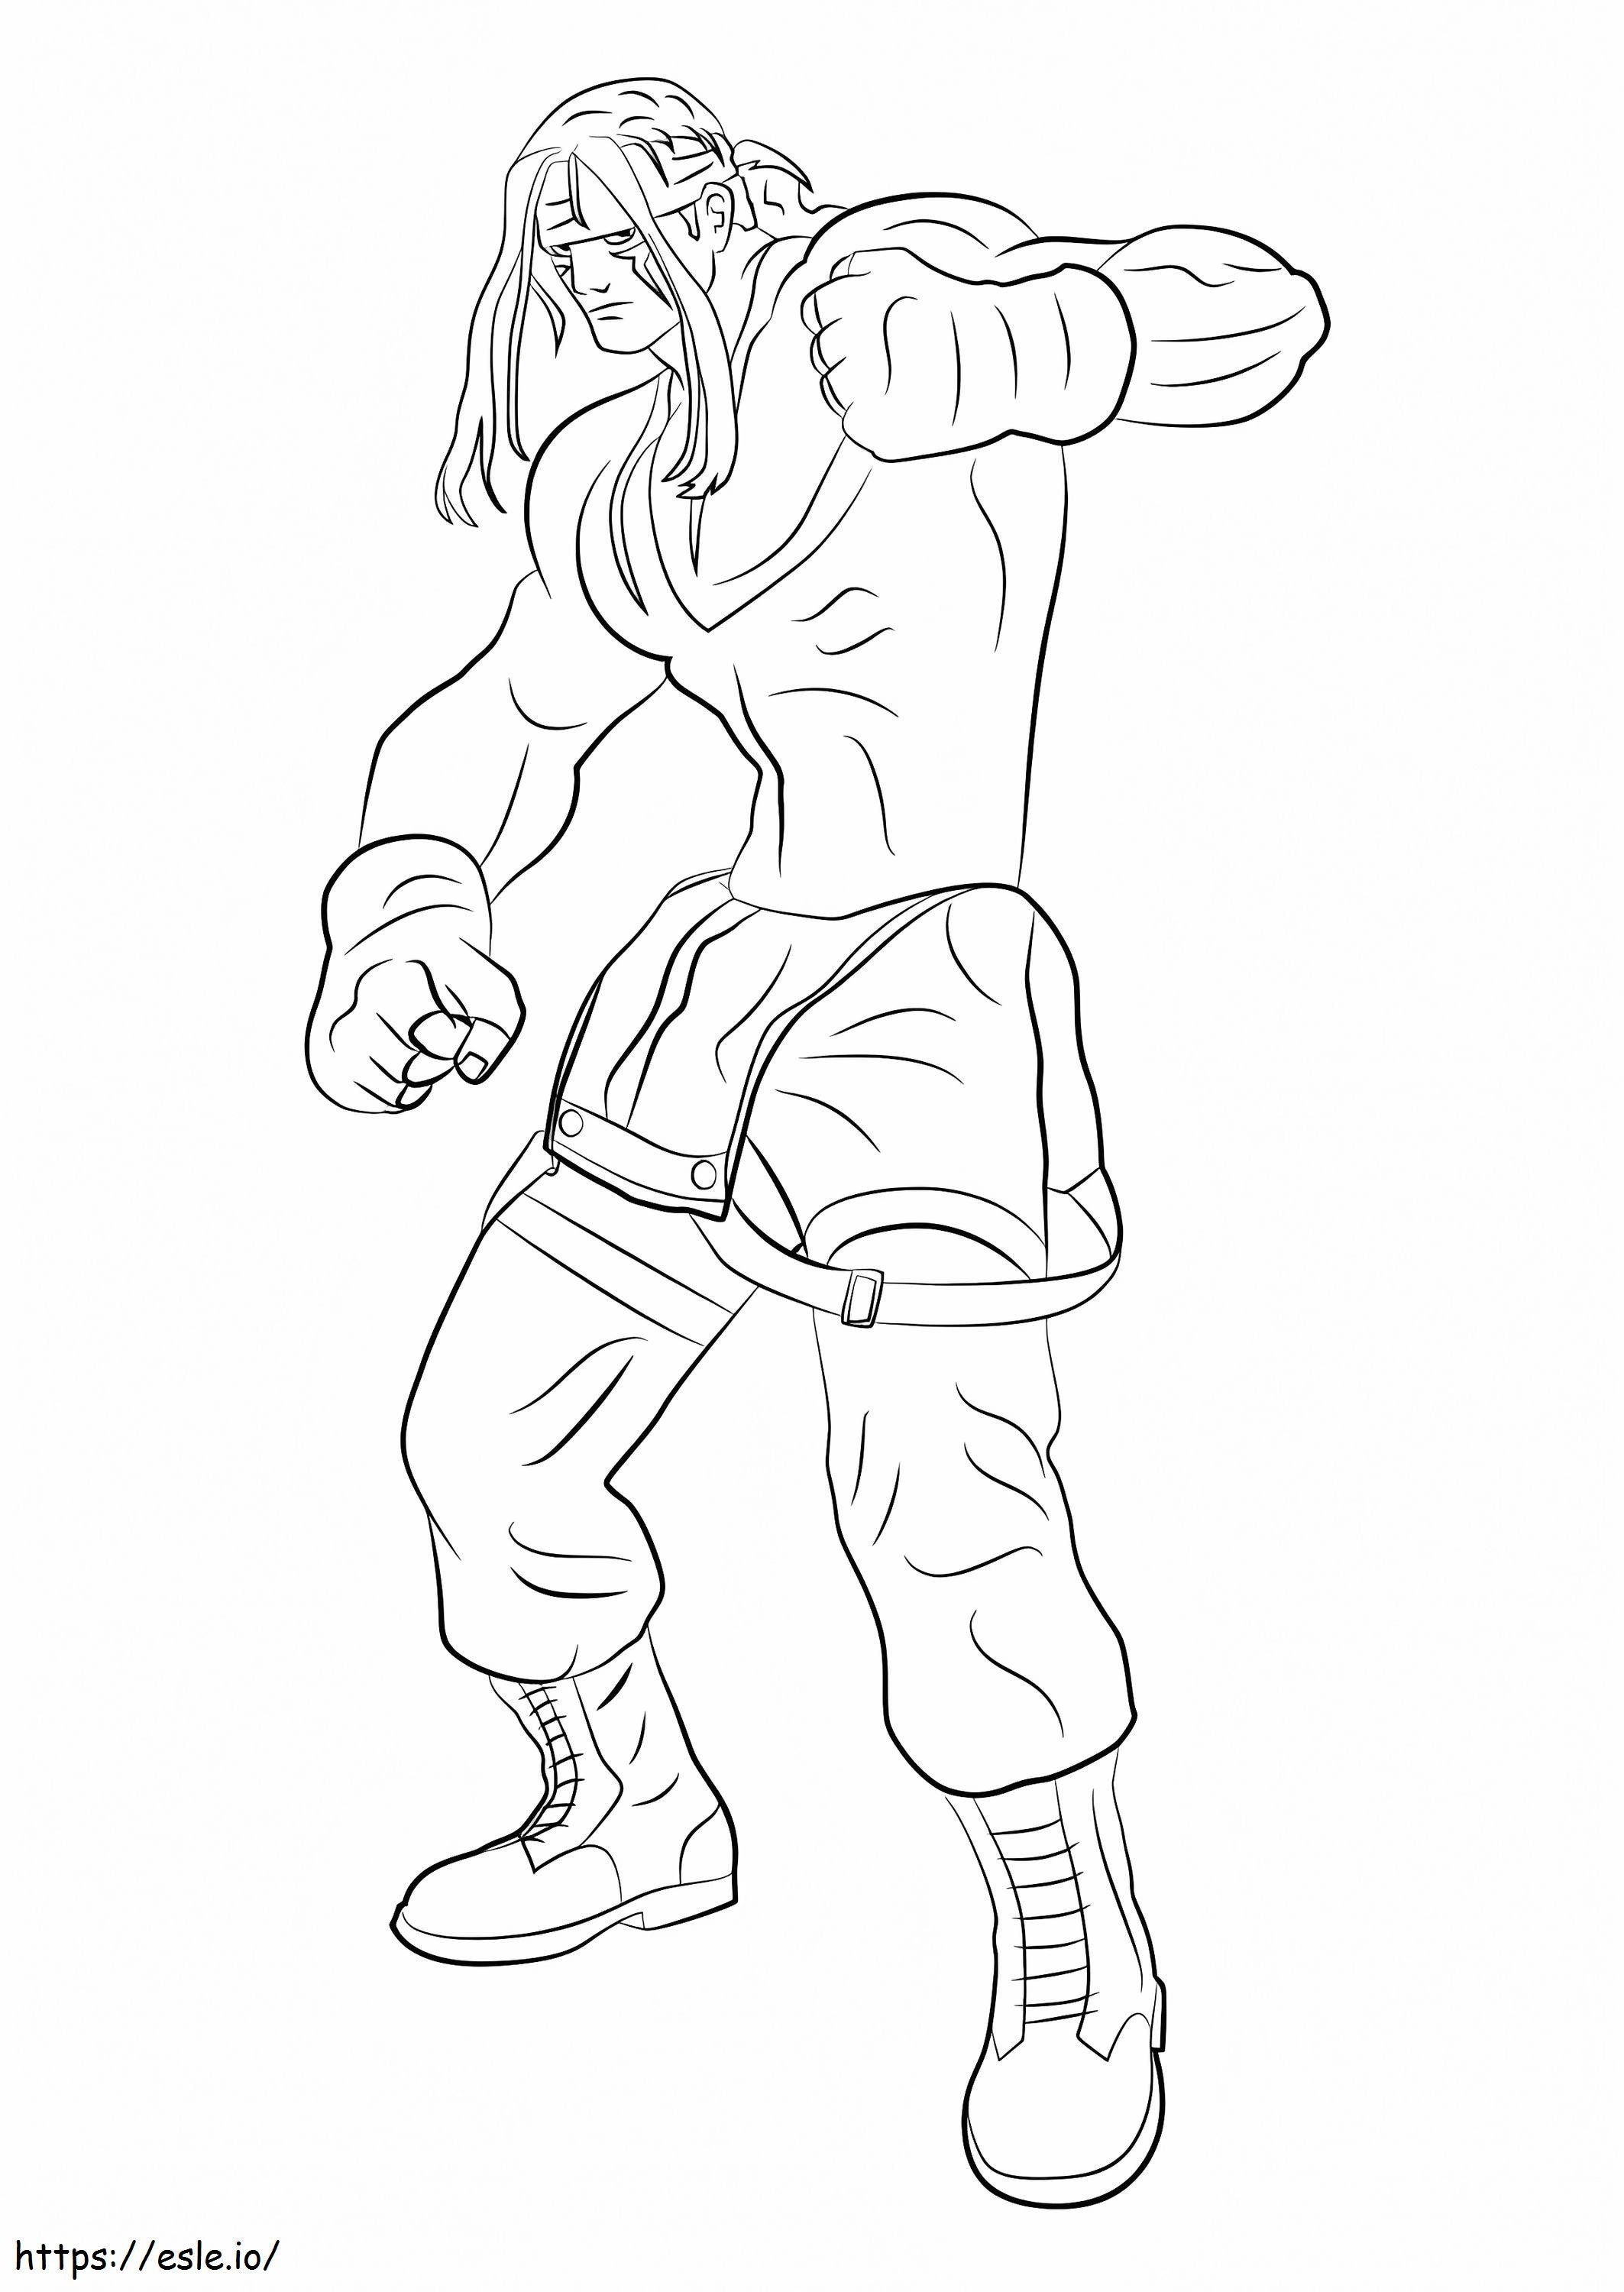 Alex From Street Fighter coloring page